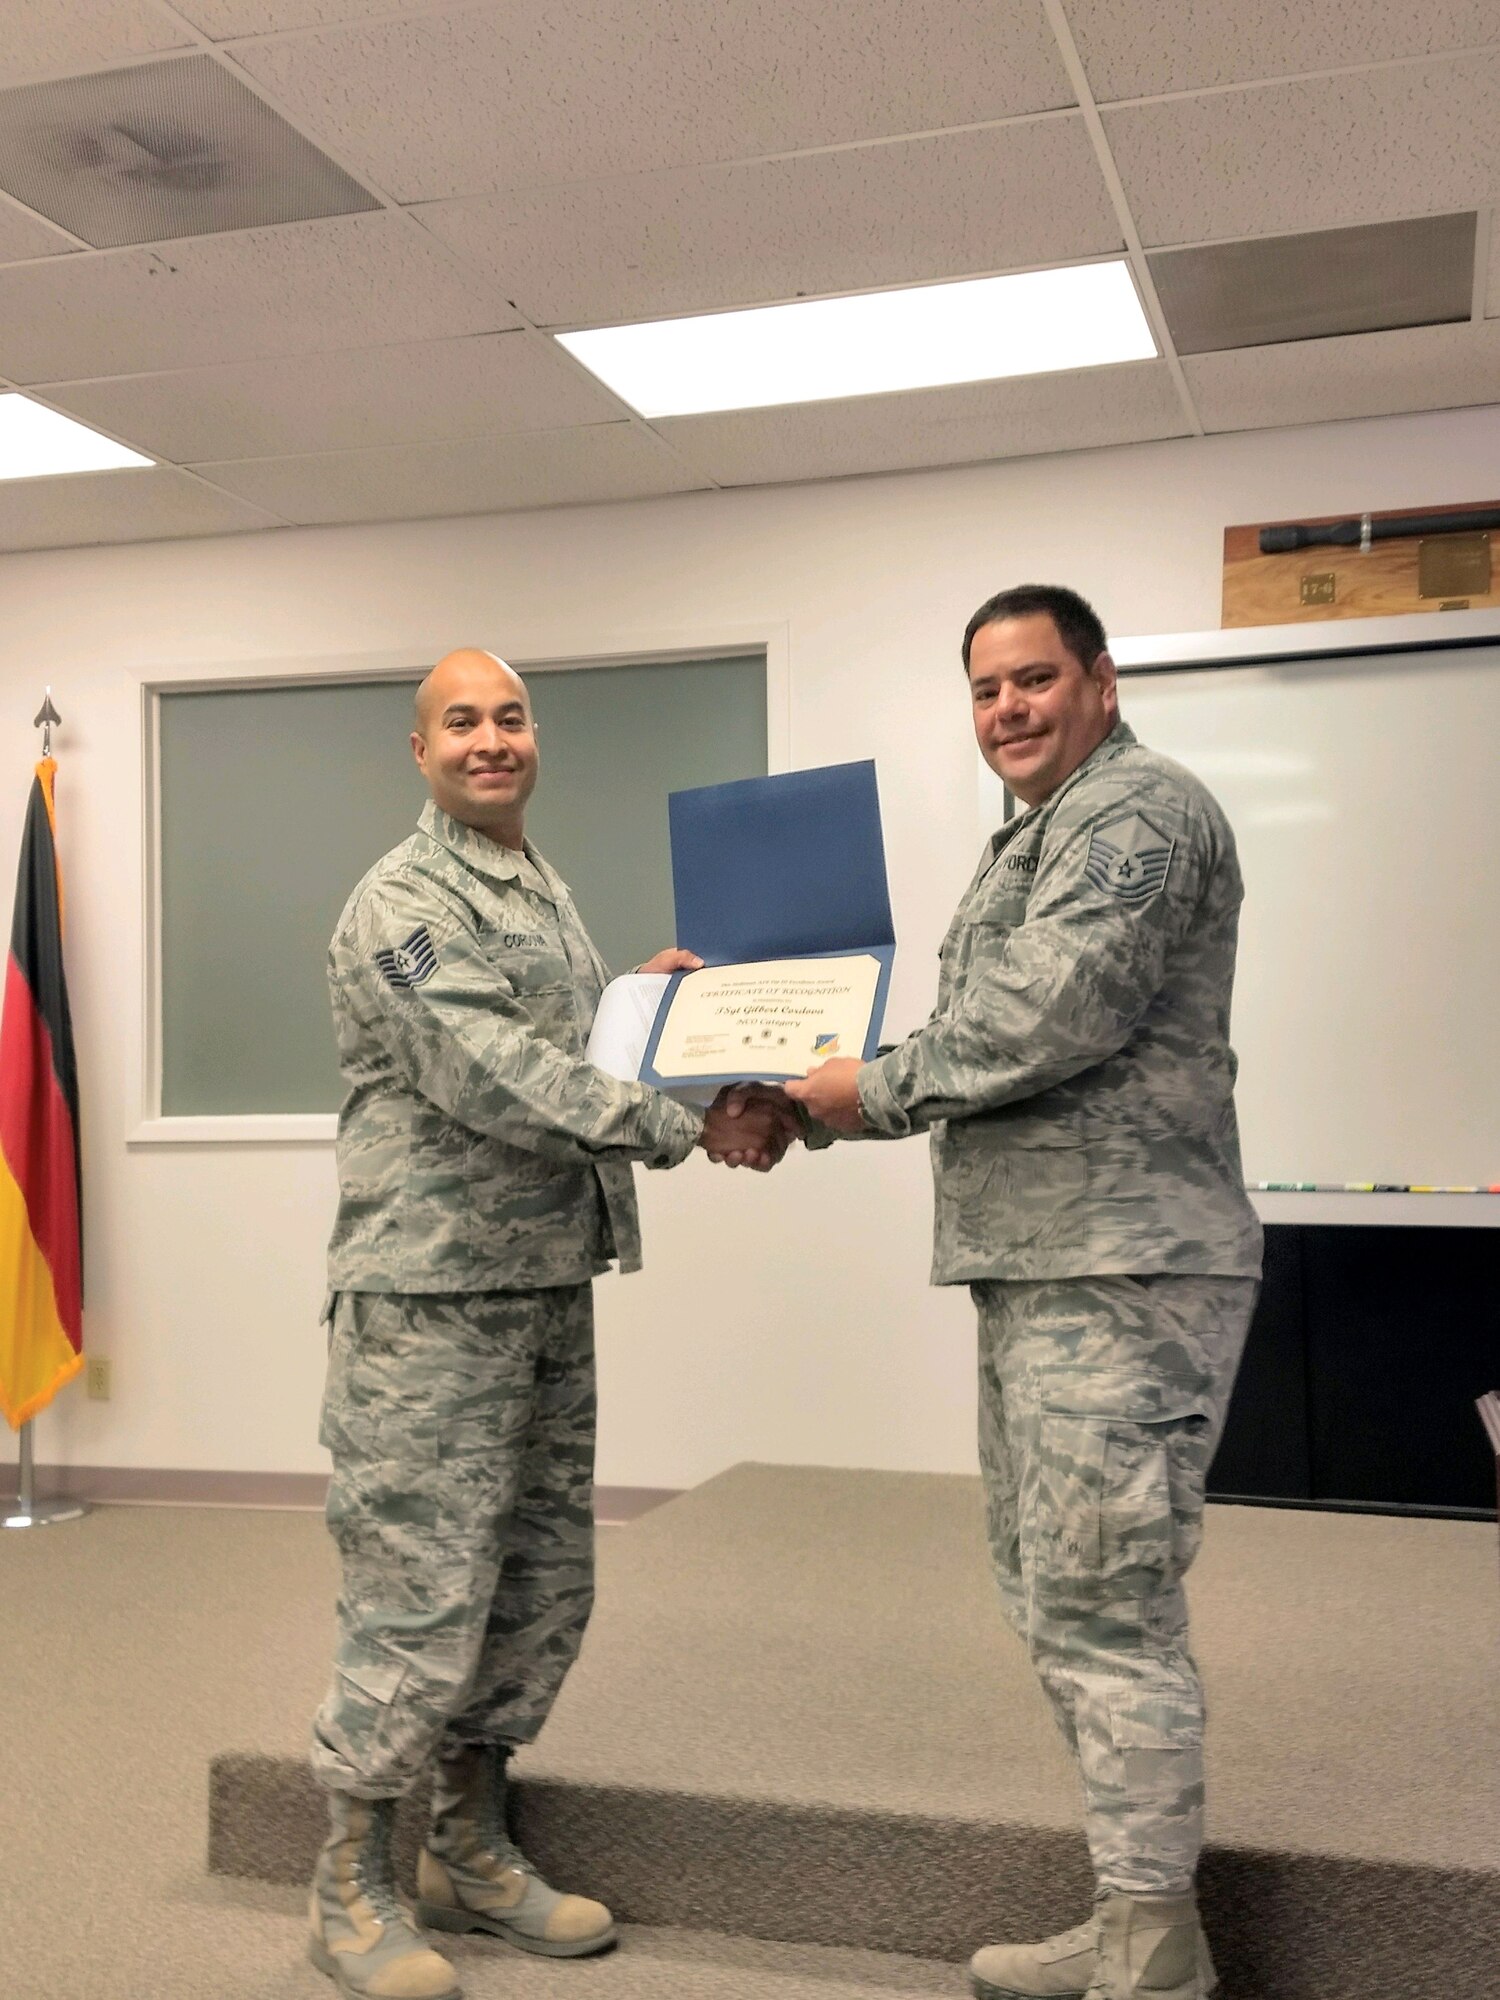 Tech. Sgt. Gilbert Cordova, 49th Force Support Squadron Airman Leadership School instructor, receives the October Top III Noncommissioned Officer Award from Master Sgt. Moises Guzman-Roman, 49th Operation Support Squadron airfield flight superintendent and Top III treasurer, Nov. 28, 2017, at Holloman Air Force Base, N.M. During the month of October, Cordova partnered with the Alamo City Hall, police department, recreation center, municipal court, public library and the clerks office. This coordination set up and judged 15 categories for 10 city of Alamogordo Halloween festivities, which was attended by 400 people. He also completed six defense acquisition university courses while instructing an ALS class and mentored 32 students from 12 different Air Force specialty codes.